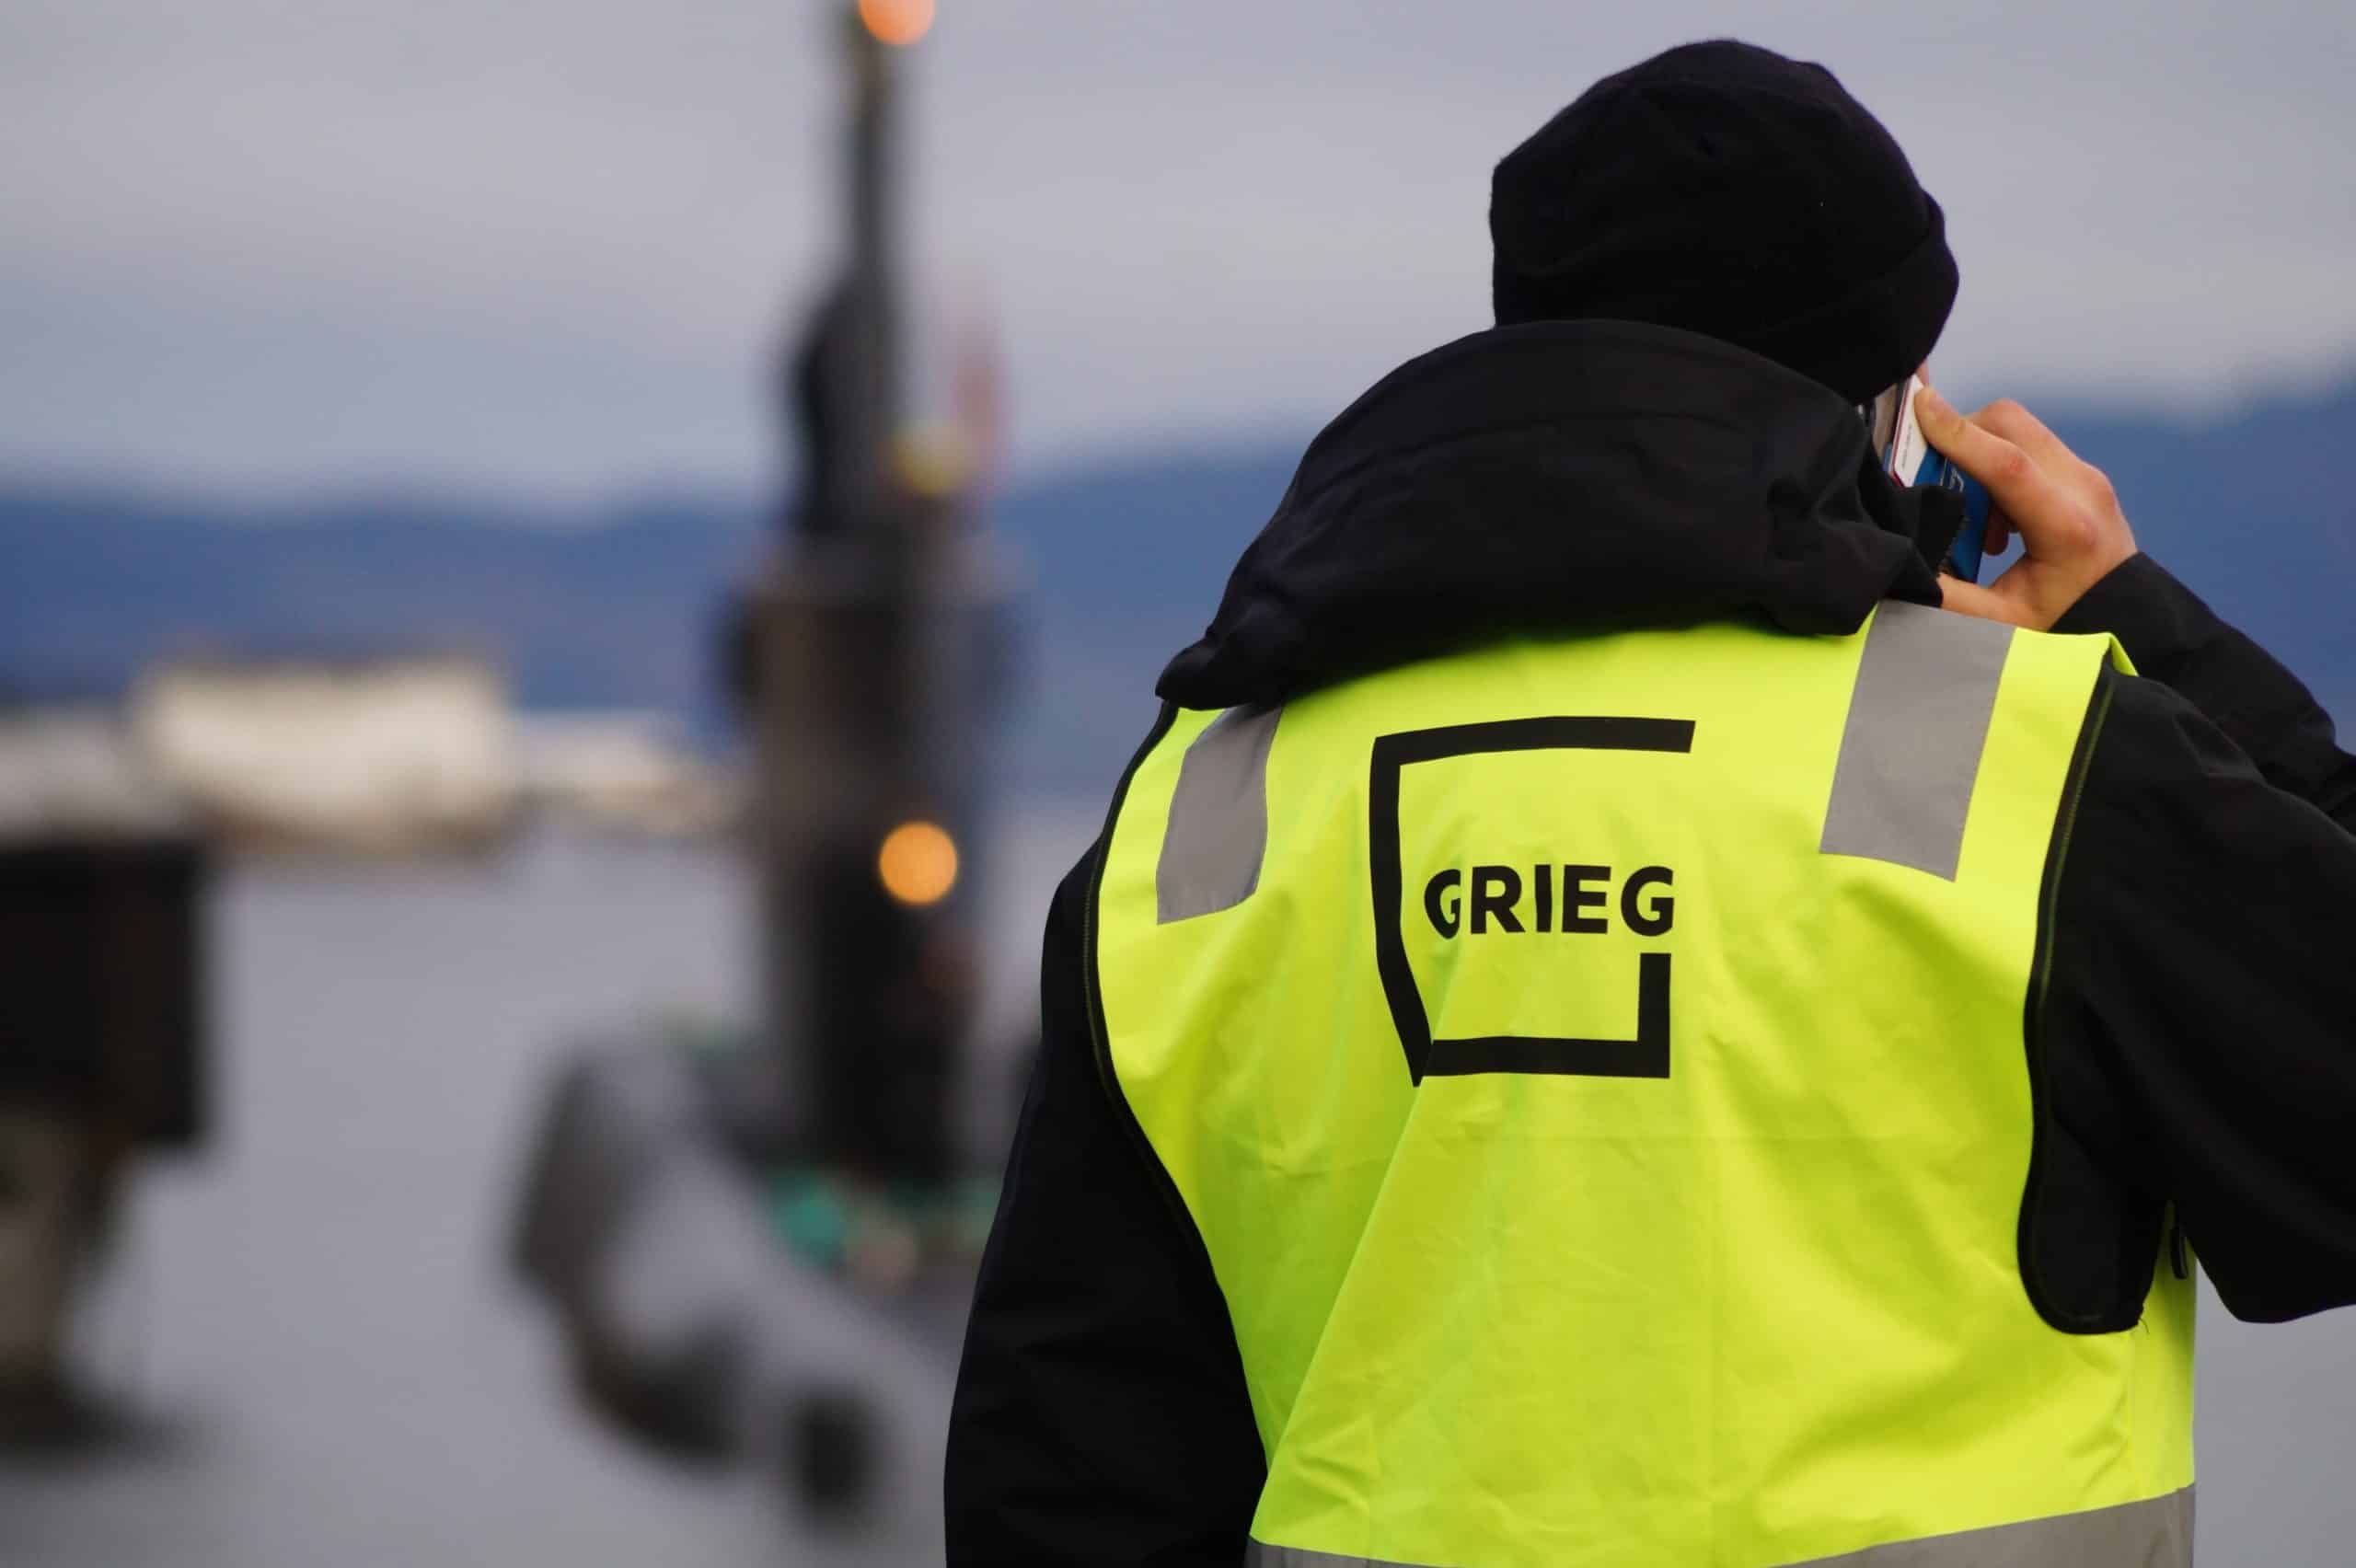 A man holding a phone, wearing a Grieg reflective vest.